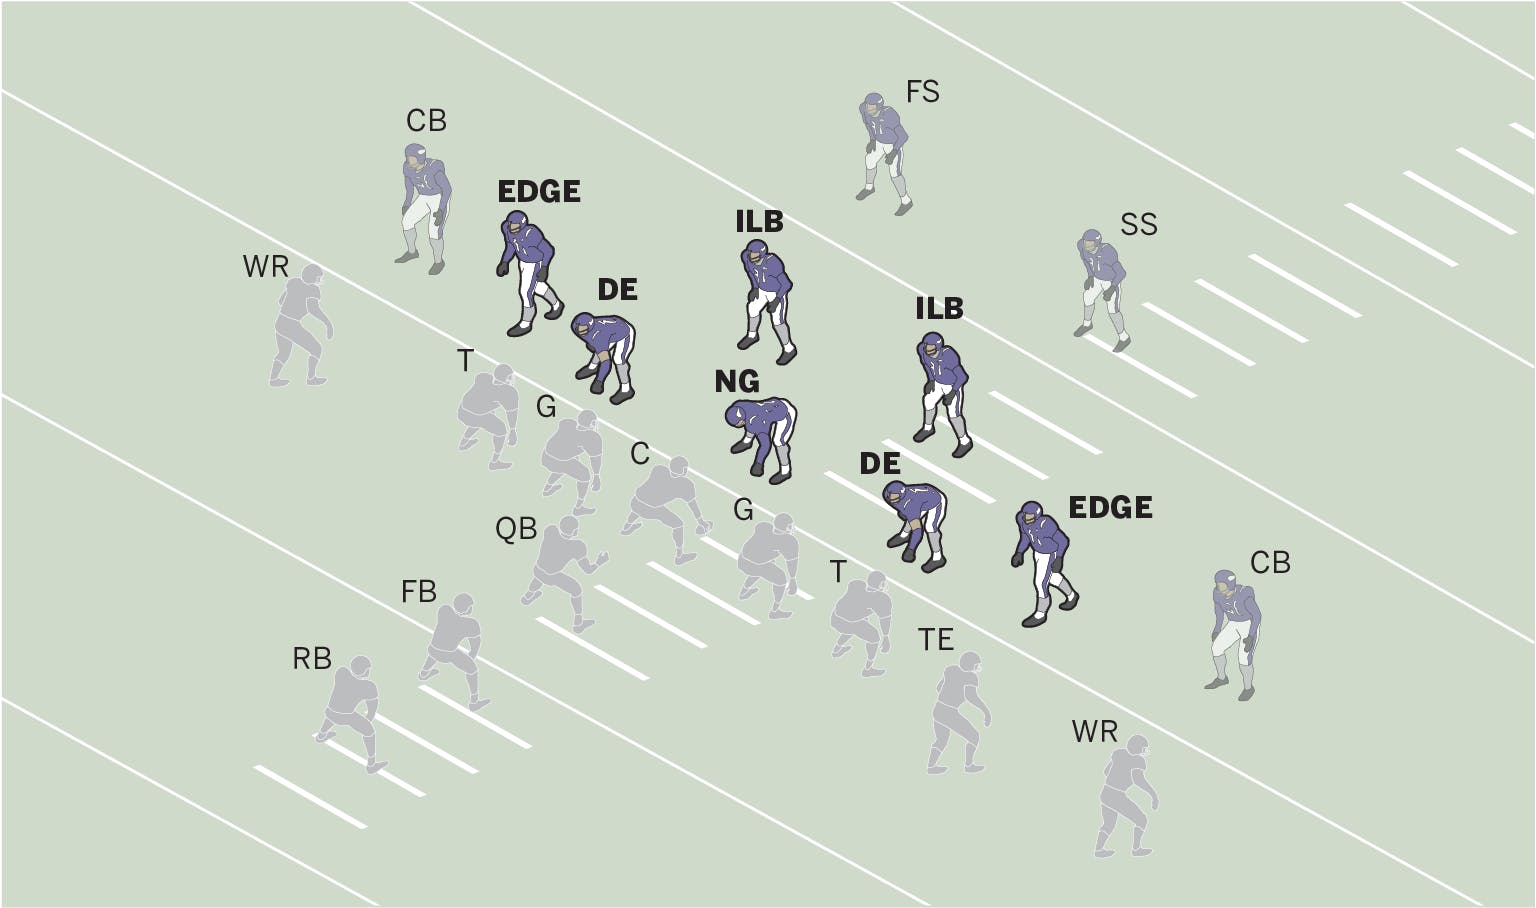 A diagram of a football field with defensive players highlighted on the Vikings side showing how players will be positioned in Donatell's configuration.